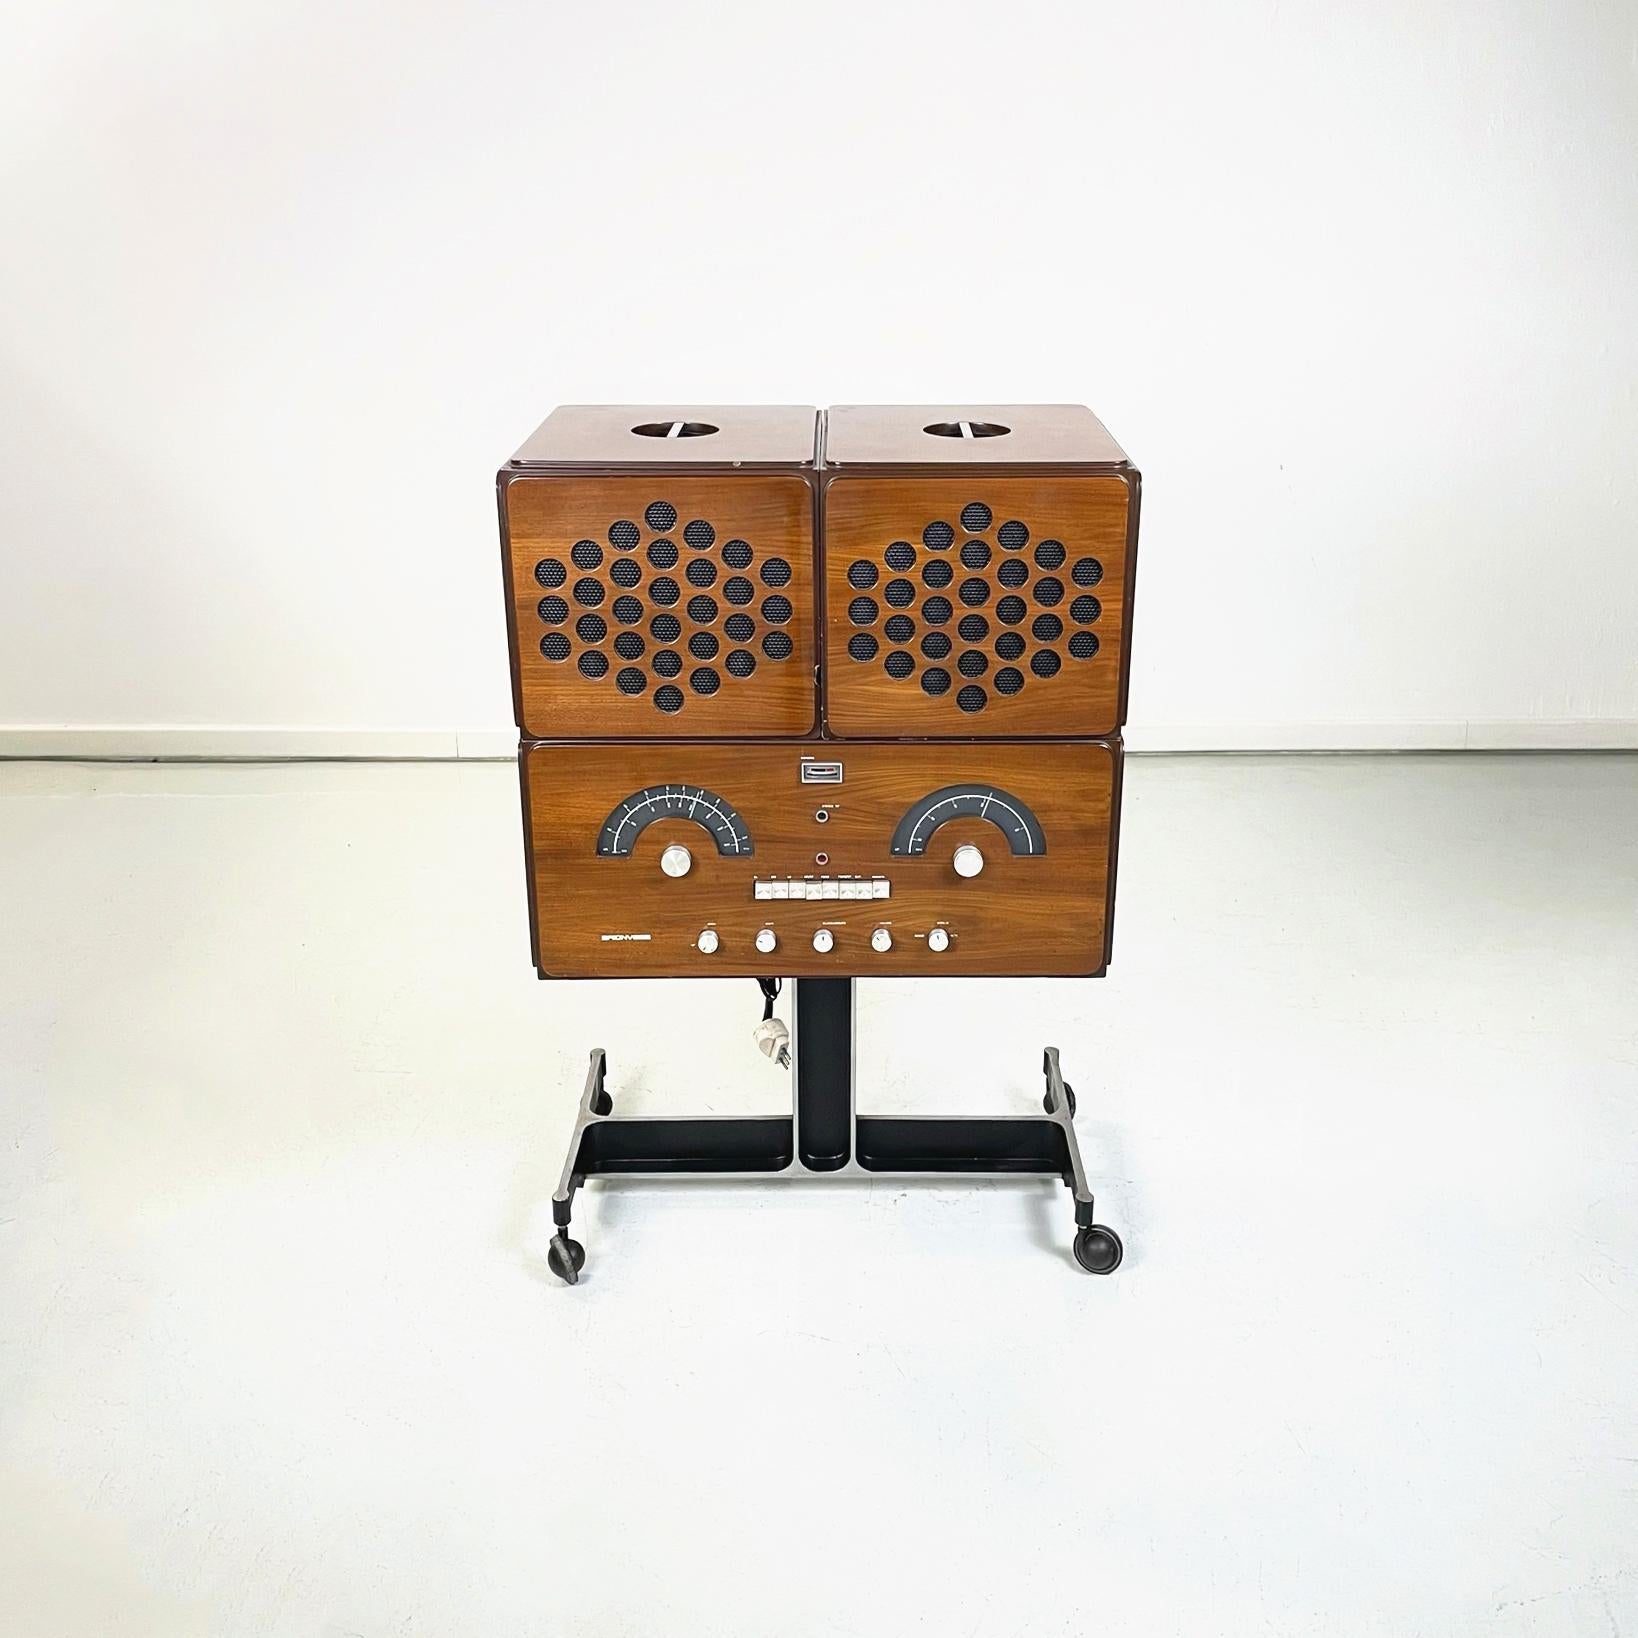 Italian modern radiophonograph RR126 and record player by Castiglioni Brionvega, 1960s
Radiophonograph RR126 and record player with rectangular base, in wood with dark brown profiles. There are two sound boxes, which can be placed on top or on the